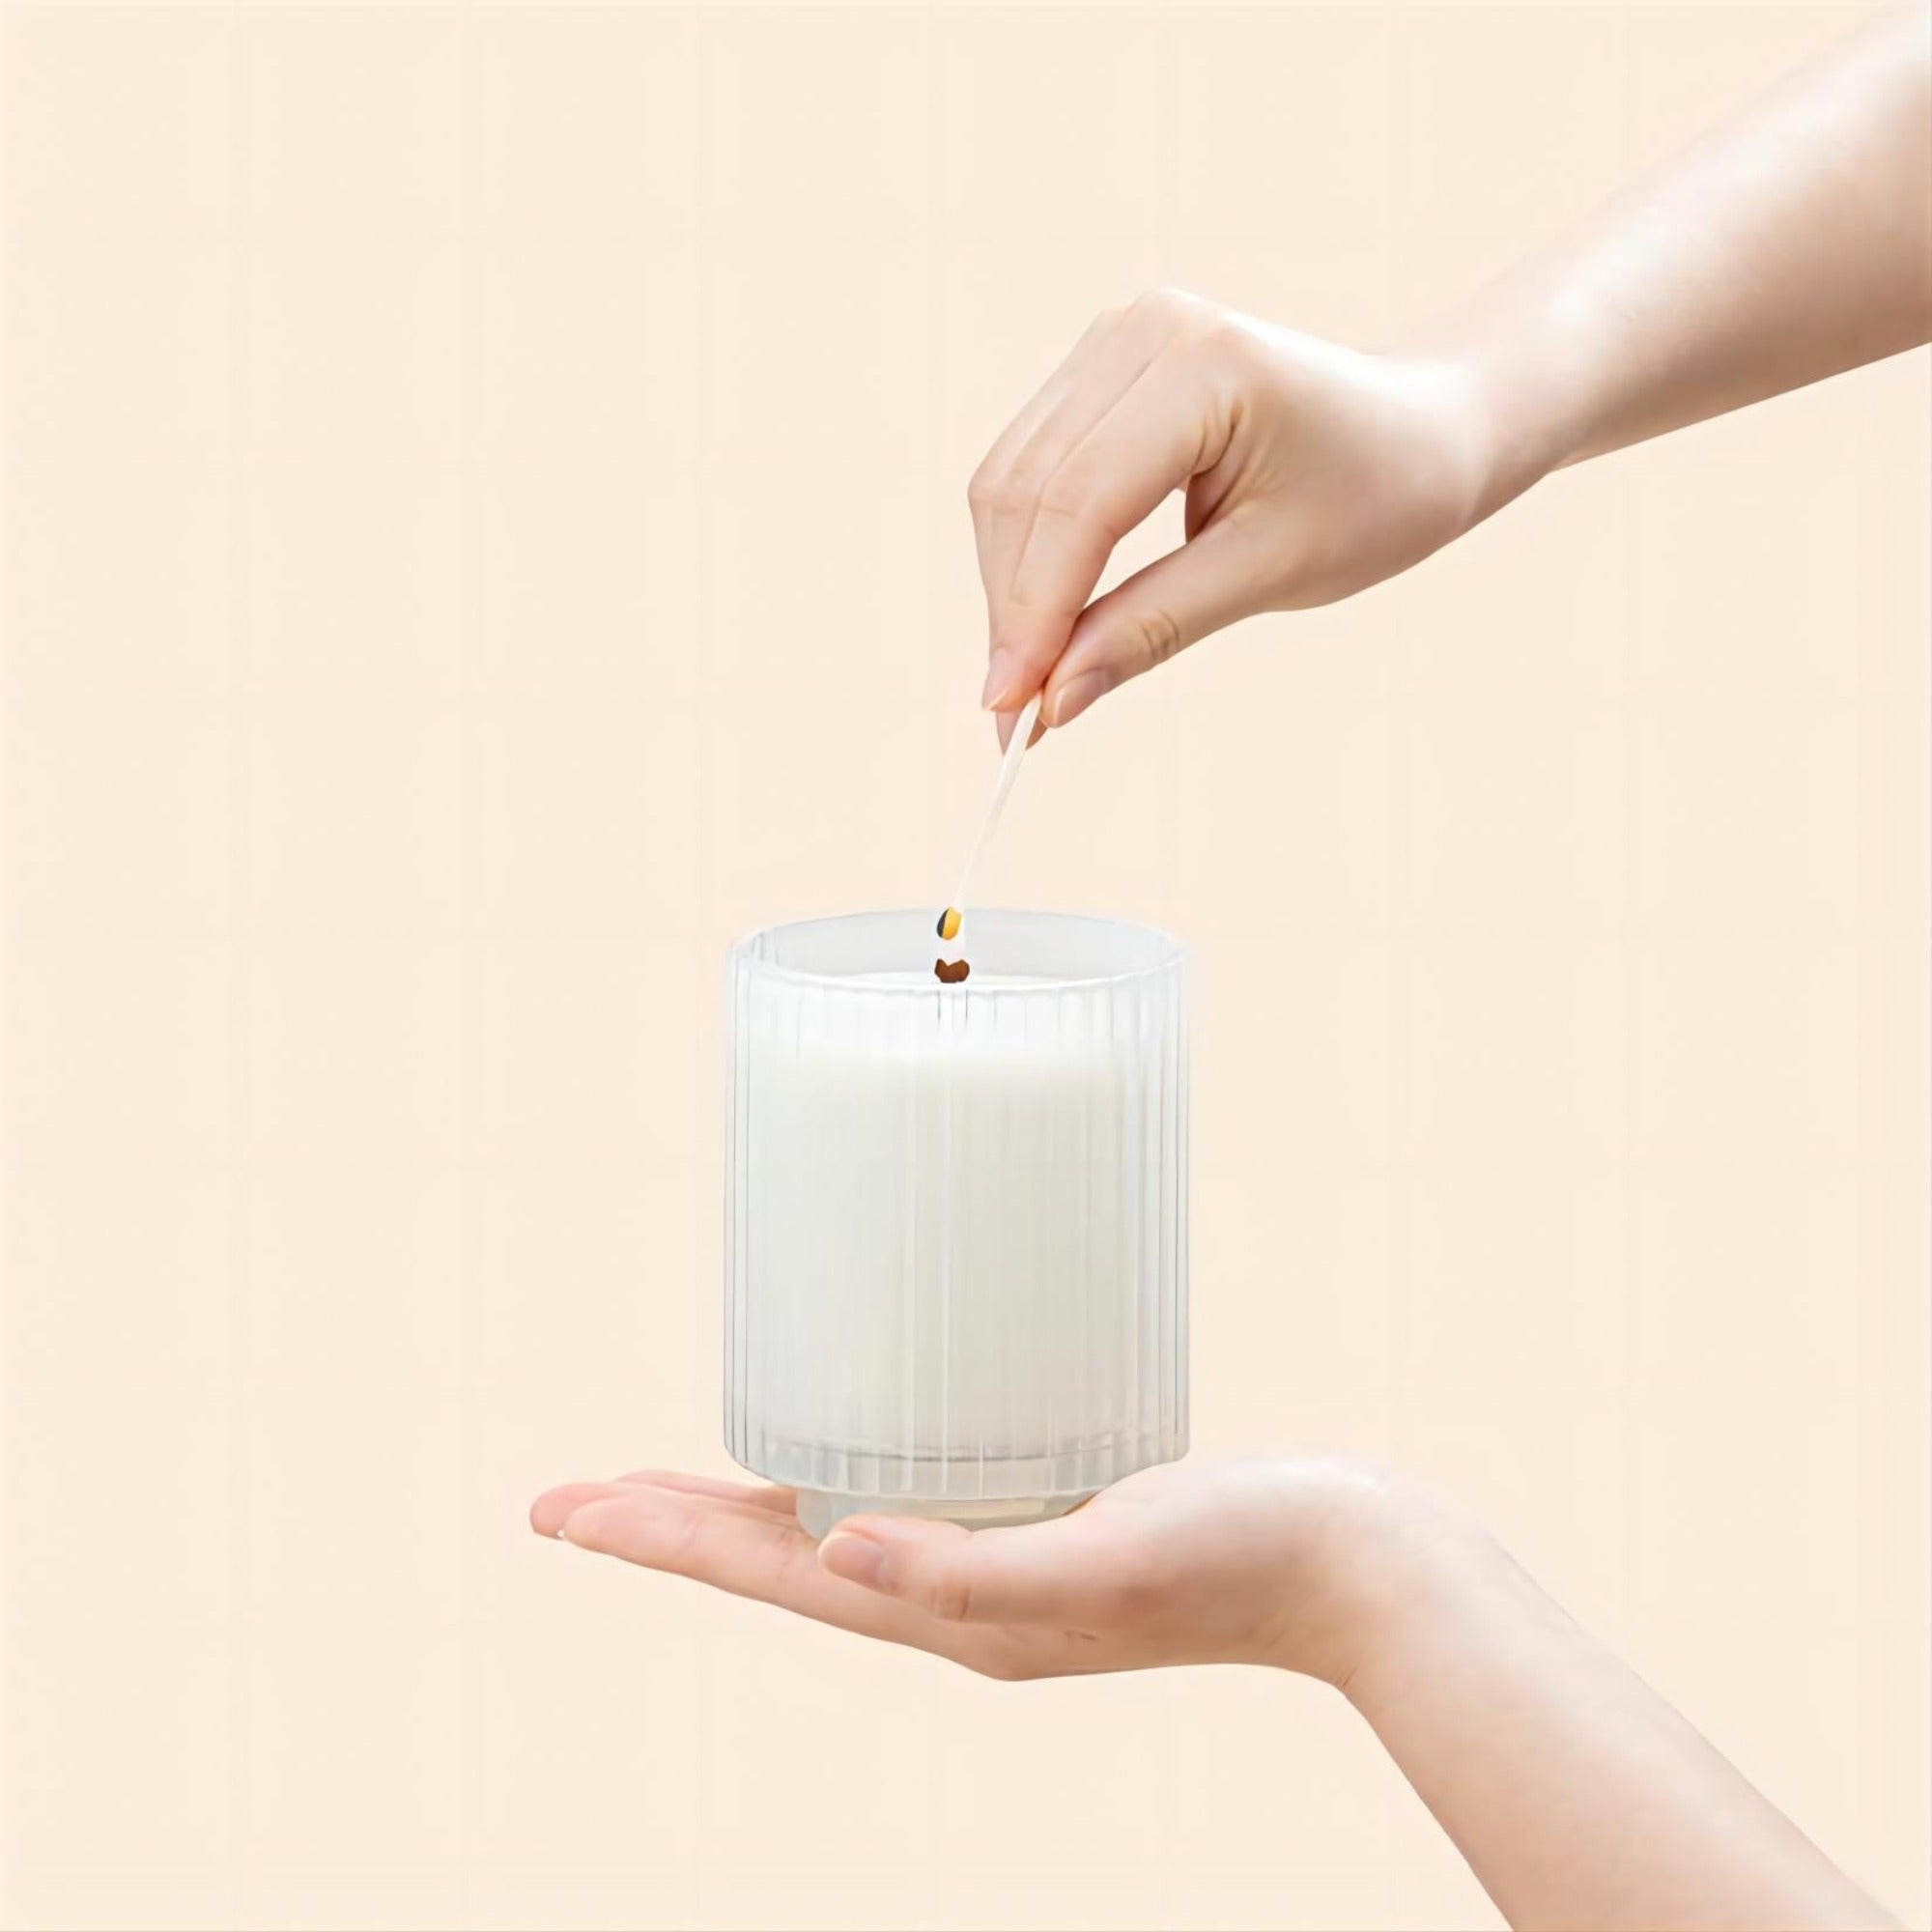 Photo shot of lighting Amélie - Vanilla Coconut 12.3oz candle with a match